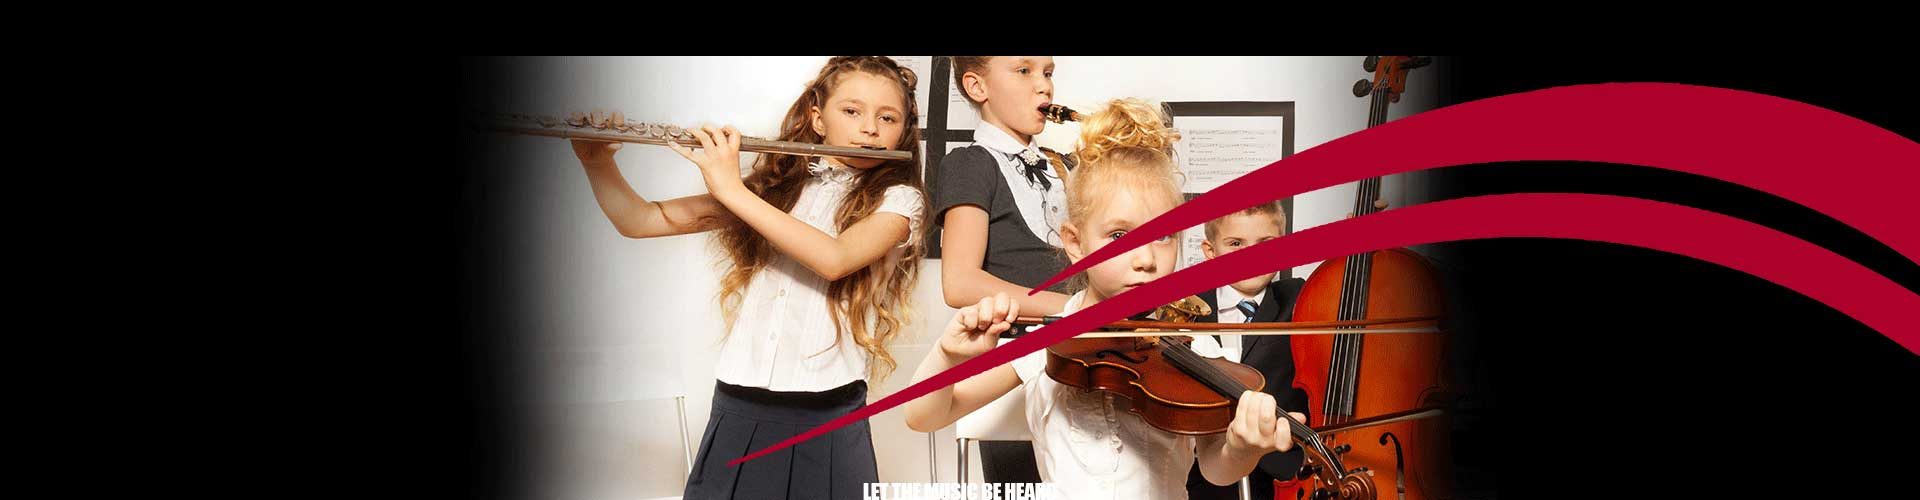 Children Build Important Life Skills from Music